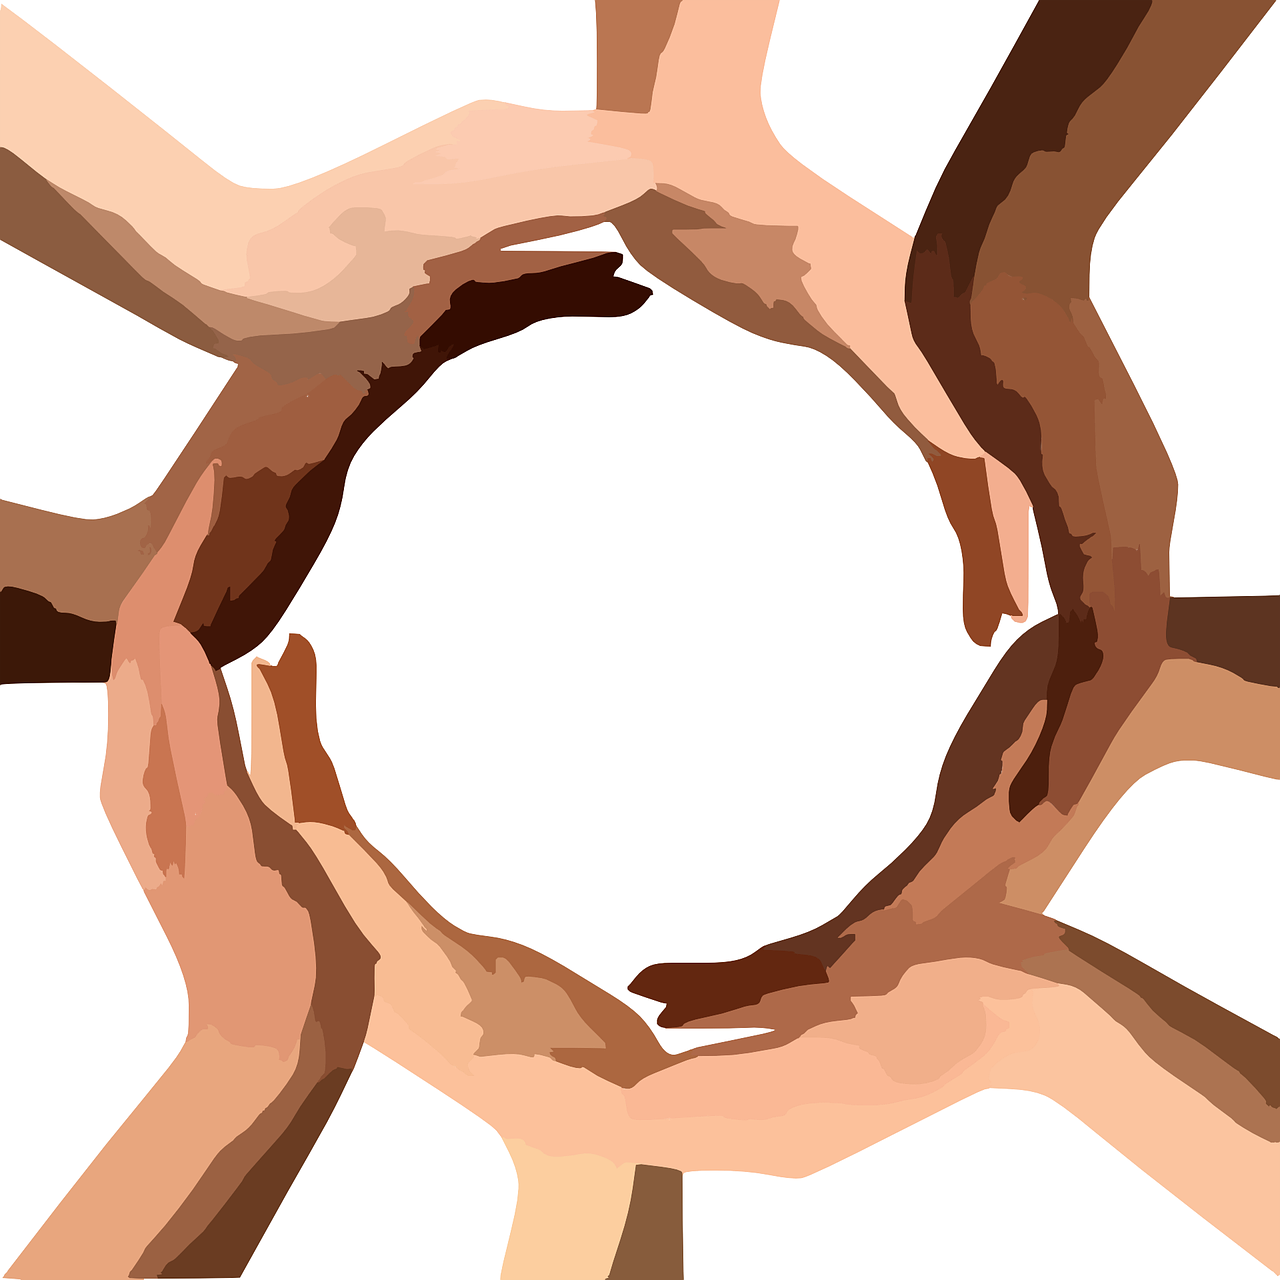 circle,hands,teamwork,community,diversity,multi-cultural,multi-ethnic,multi-racial,together,unity,group,people,cooperation,connection,human,global,international,race,ethnicity,whole,complete,free vector graphics,free pictures, free photos, free images, royalty free, free illustrations, public domain